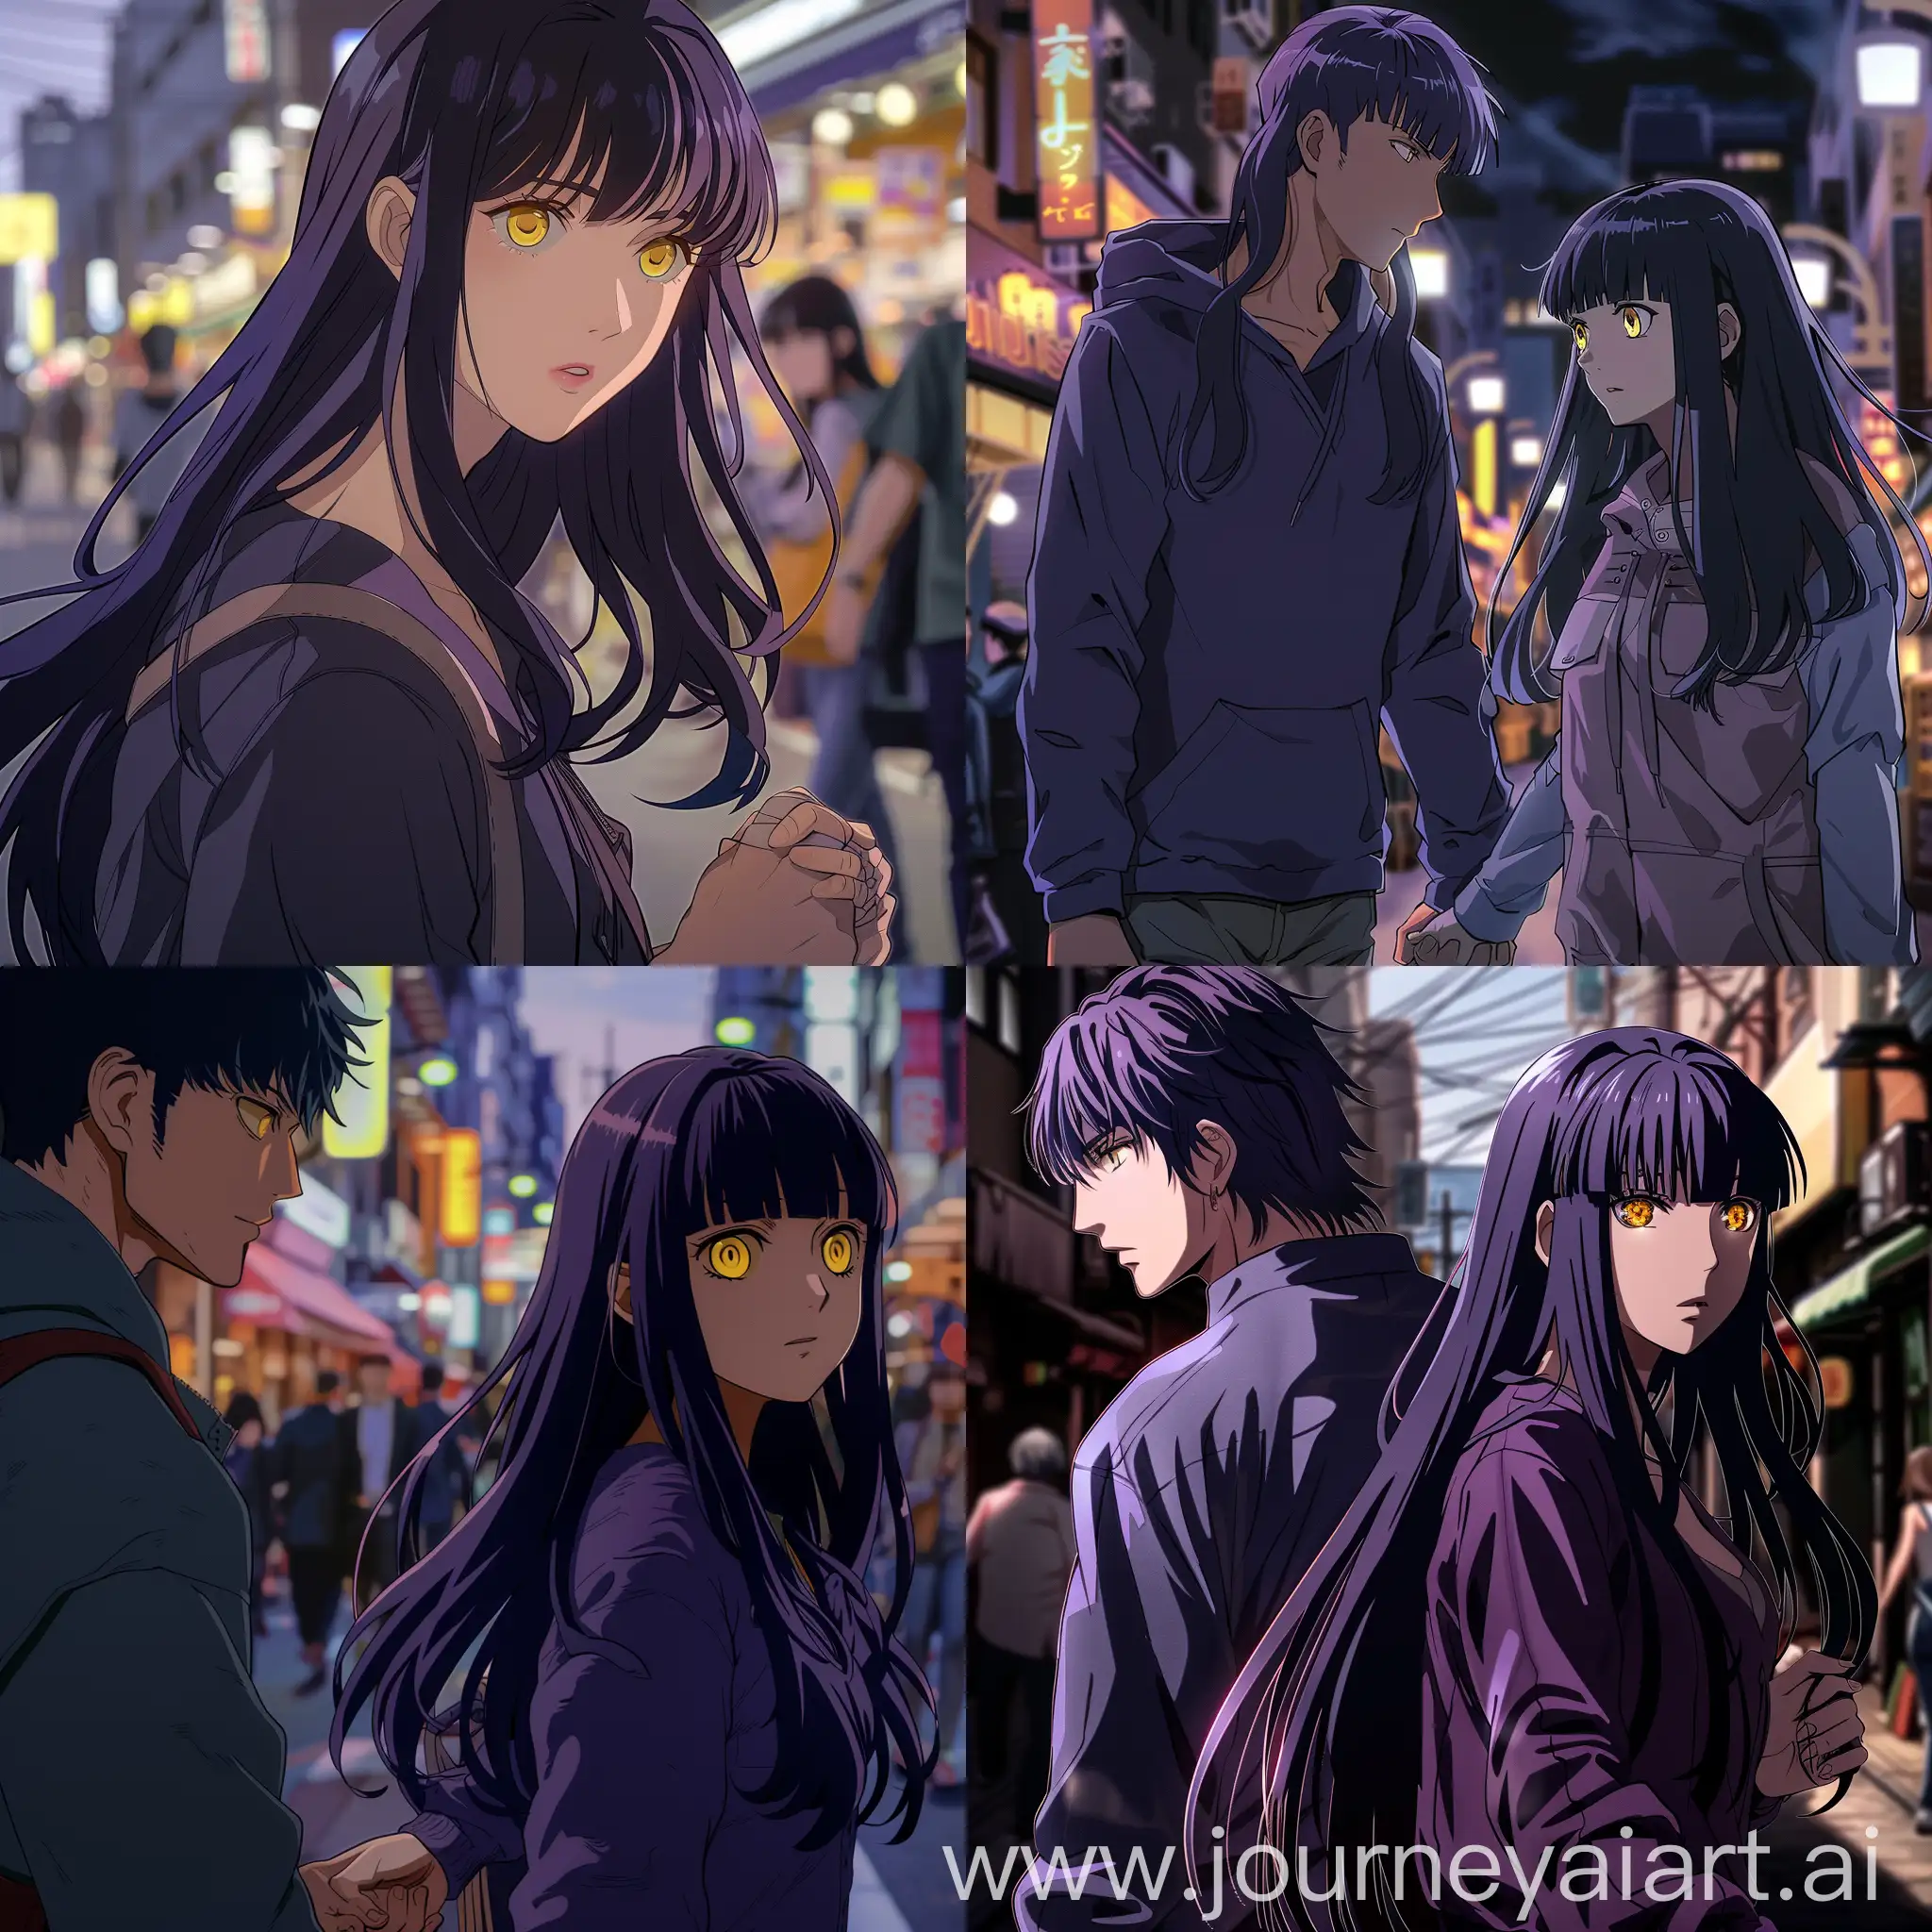 with school of jujutsu high background, female, long hair dark violet with classic bangs, golden yellow eyes, sorcerer, sweet, walking in tokyo city with megumi fushiguro, holding hands with megumi fushiguro, gazing away, close up, wearing casual clothes with megumi fushiguro, jujutsu kaisen animation style